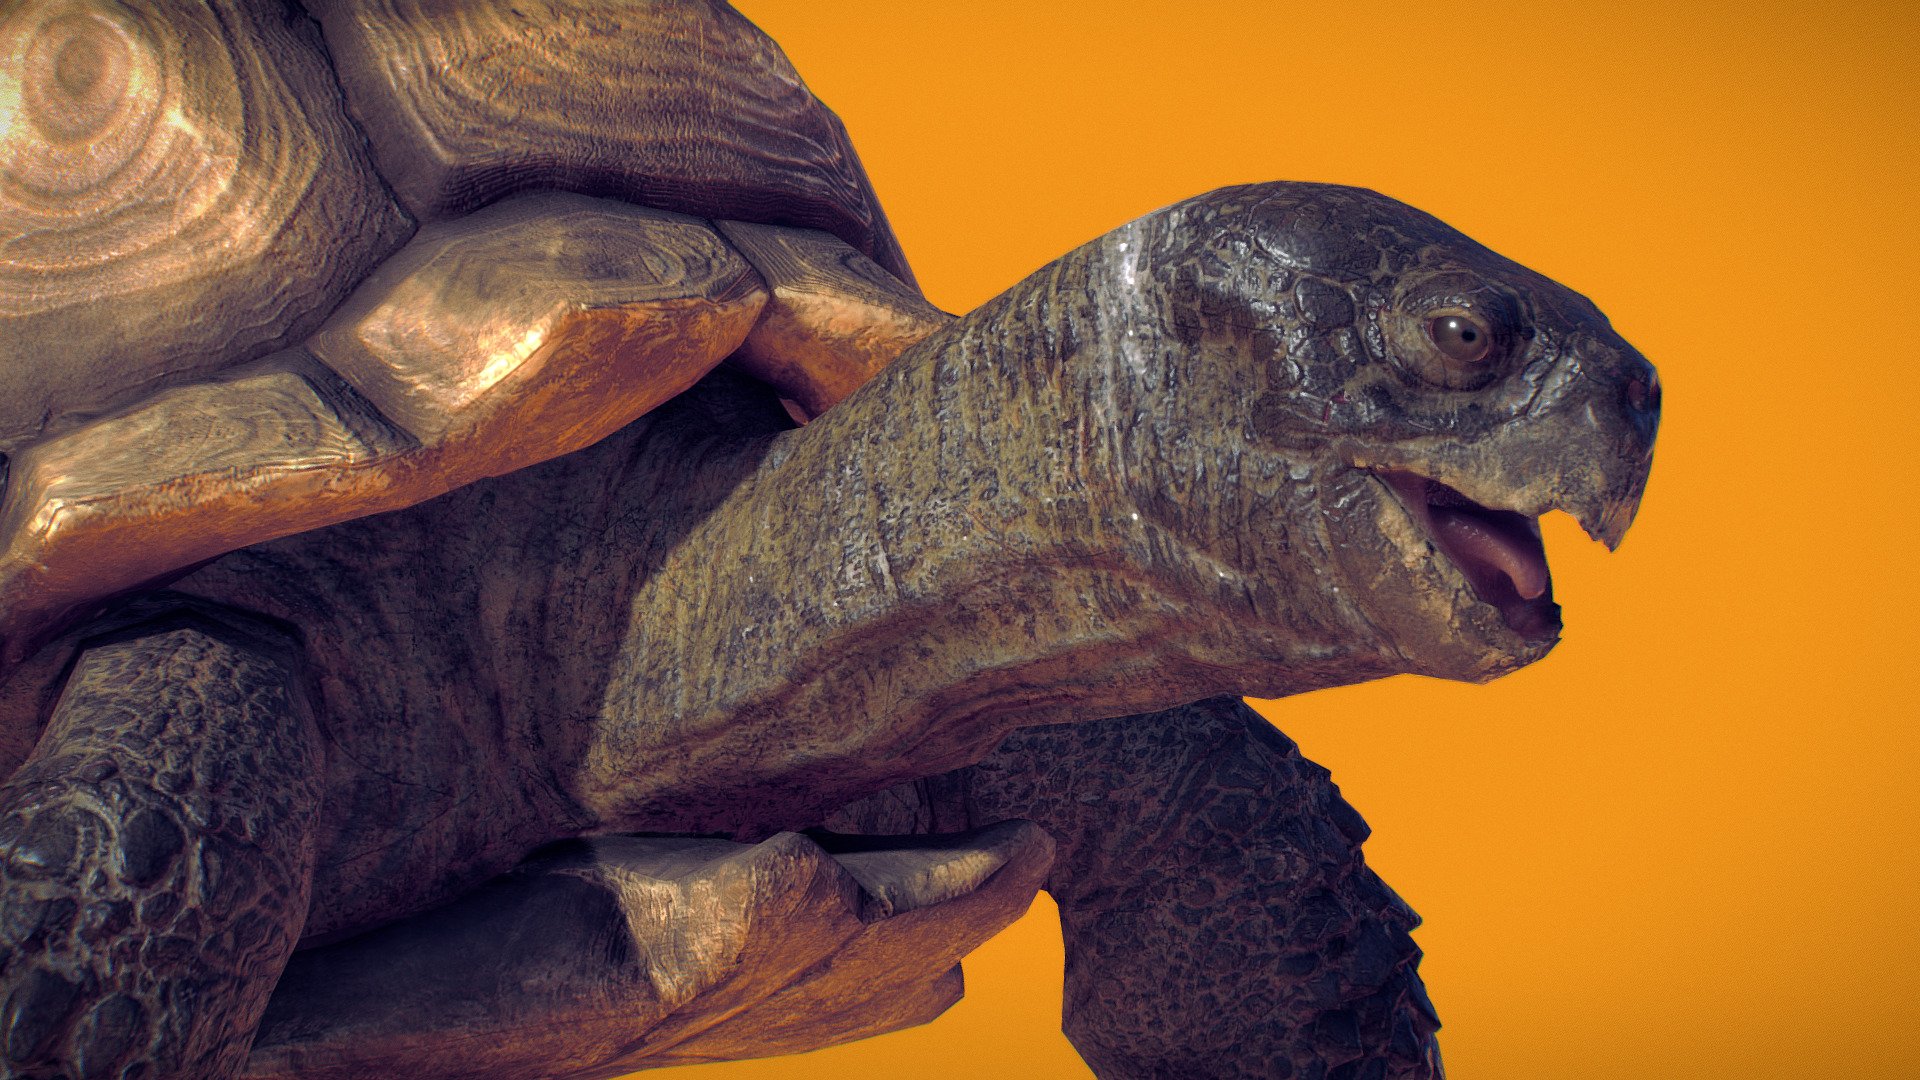 Tortoise
1/2020

Rig is a 3DS Max 2016 CAT rig!
Added the 3DS Max 2016 file and an .obj 3d model